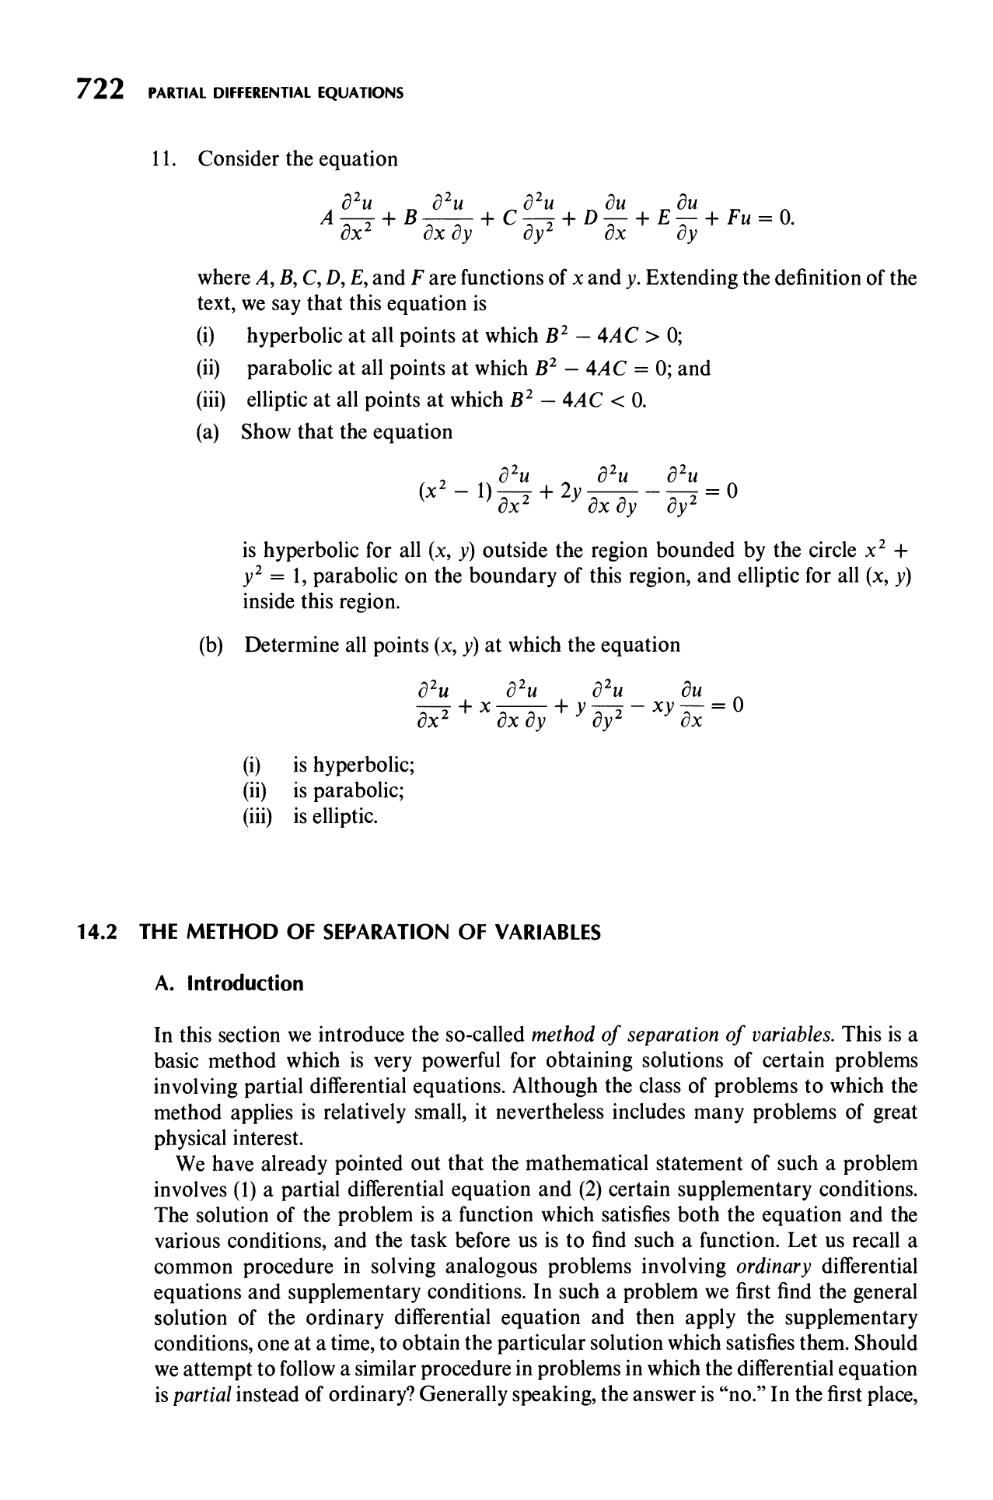 14.2  The Method of Separation of Variables